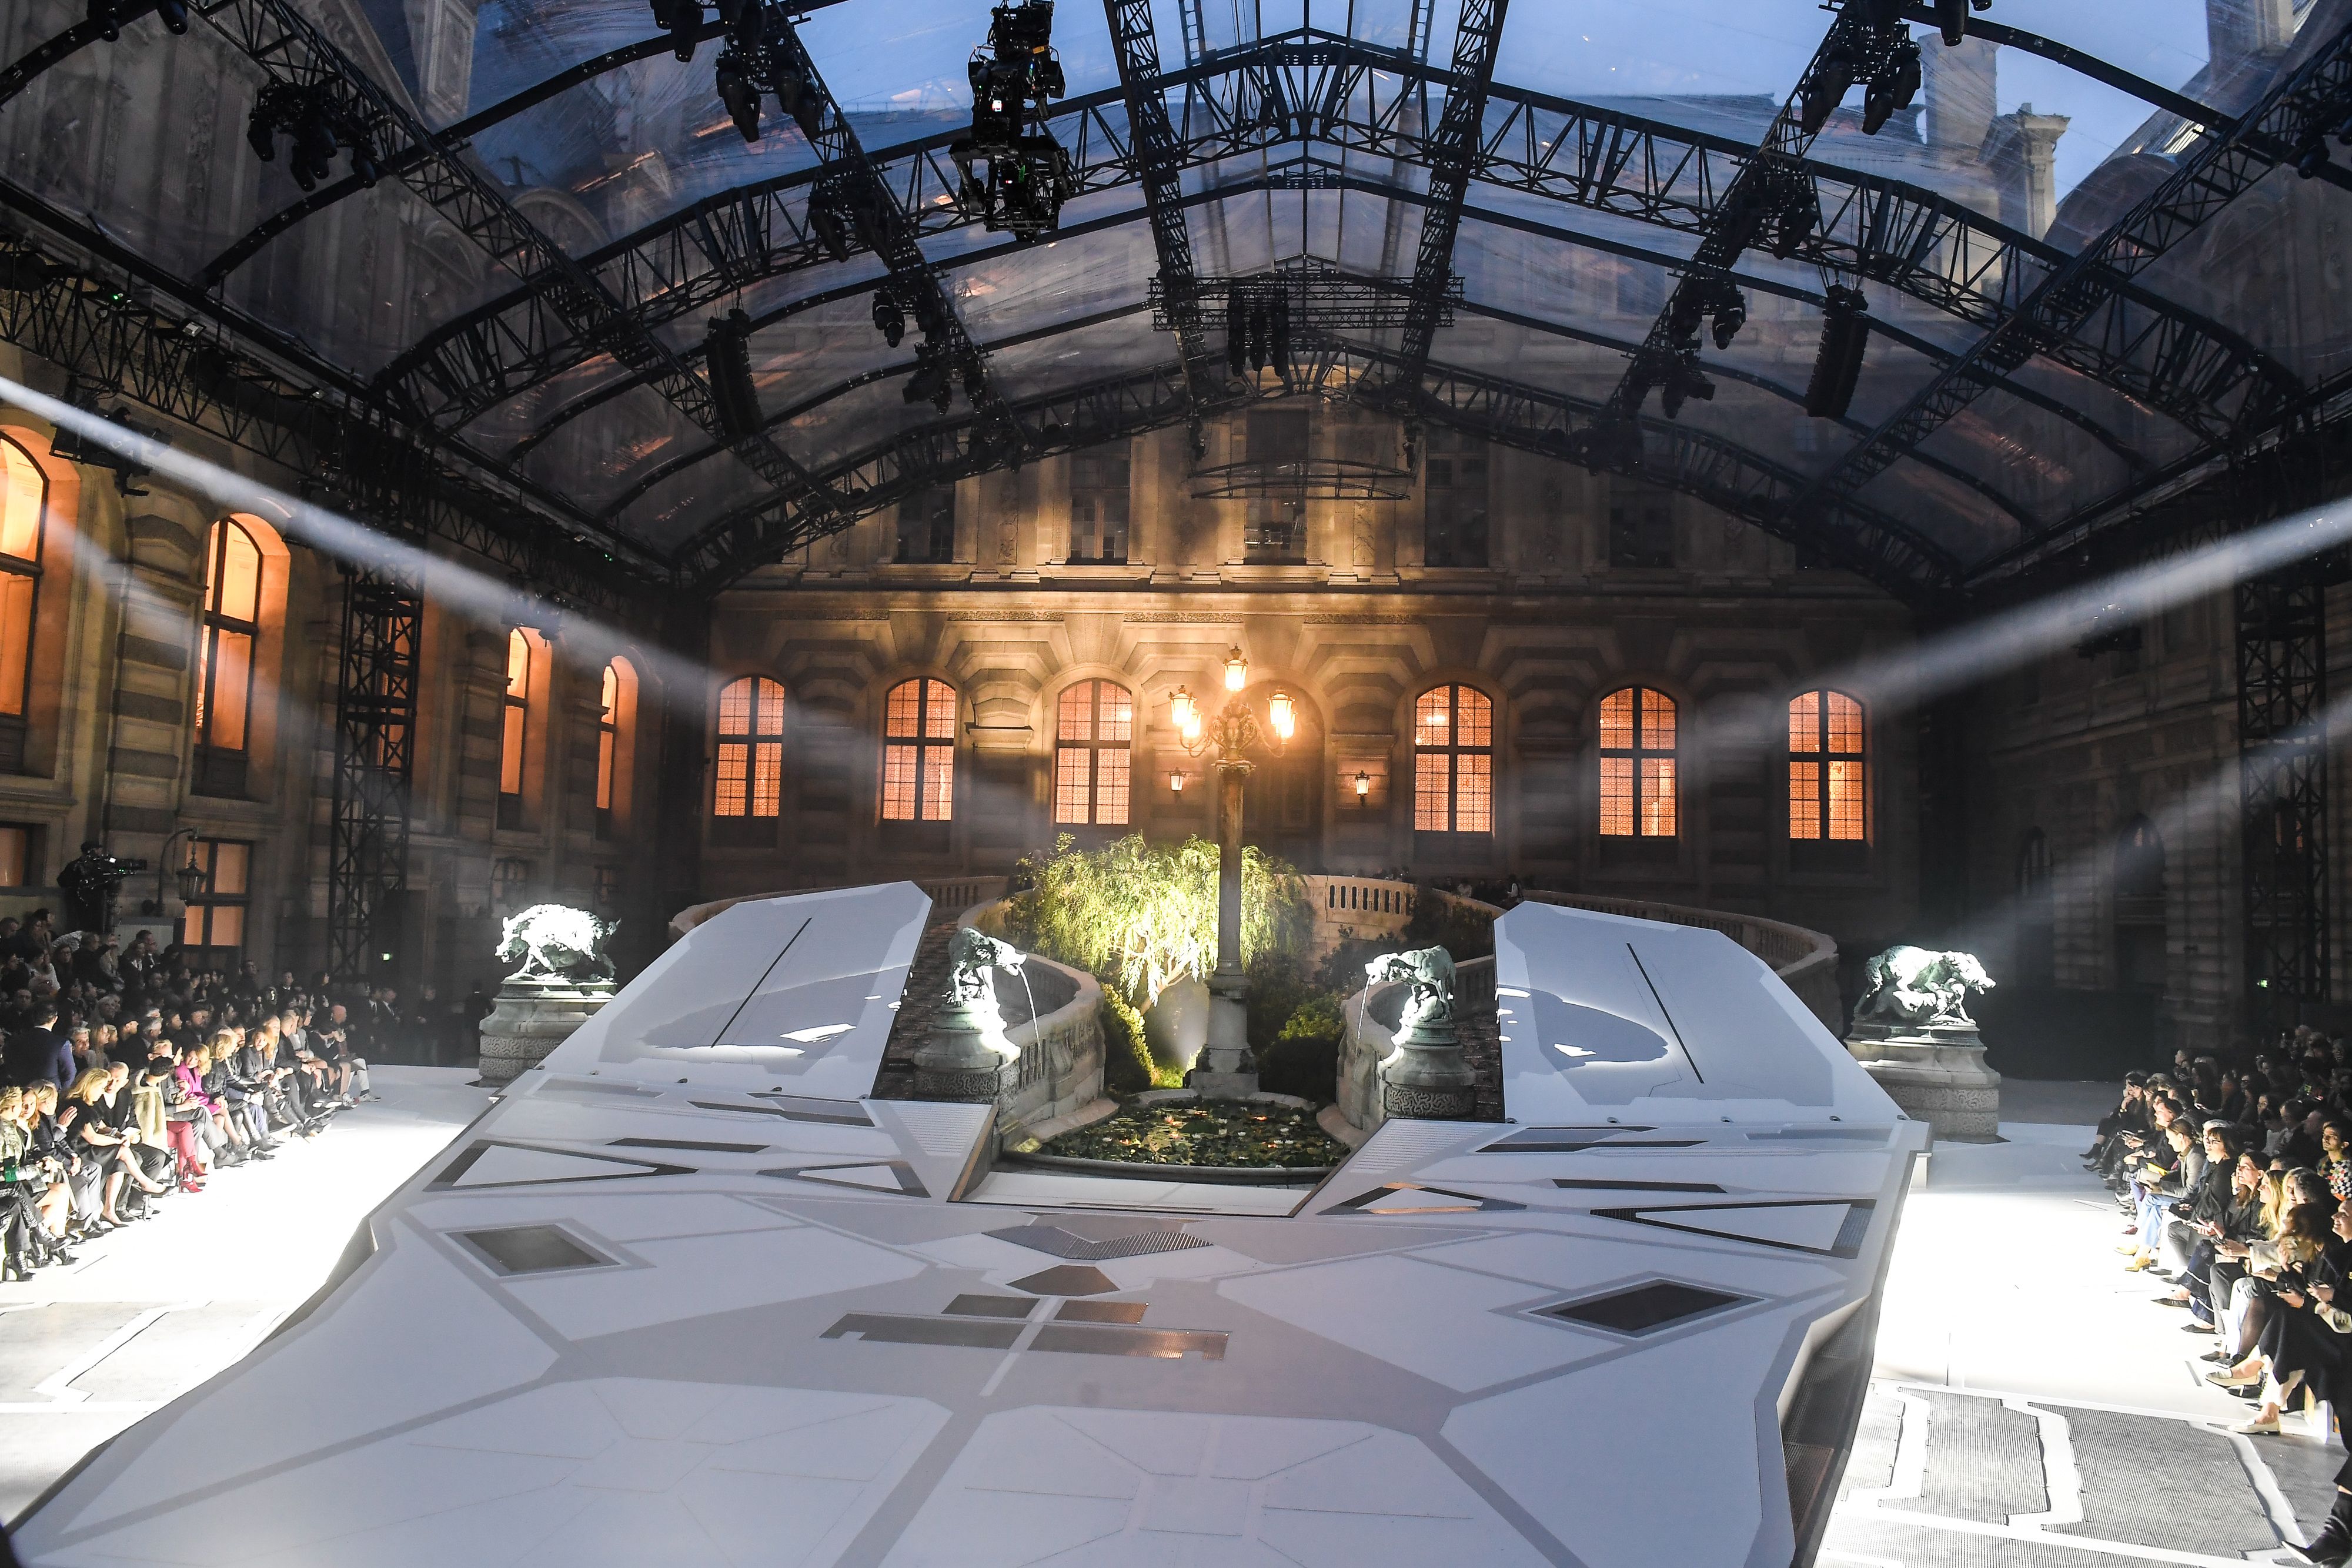 Louis Vuitton Lands a Spaceship on the Louvre